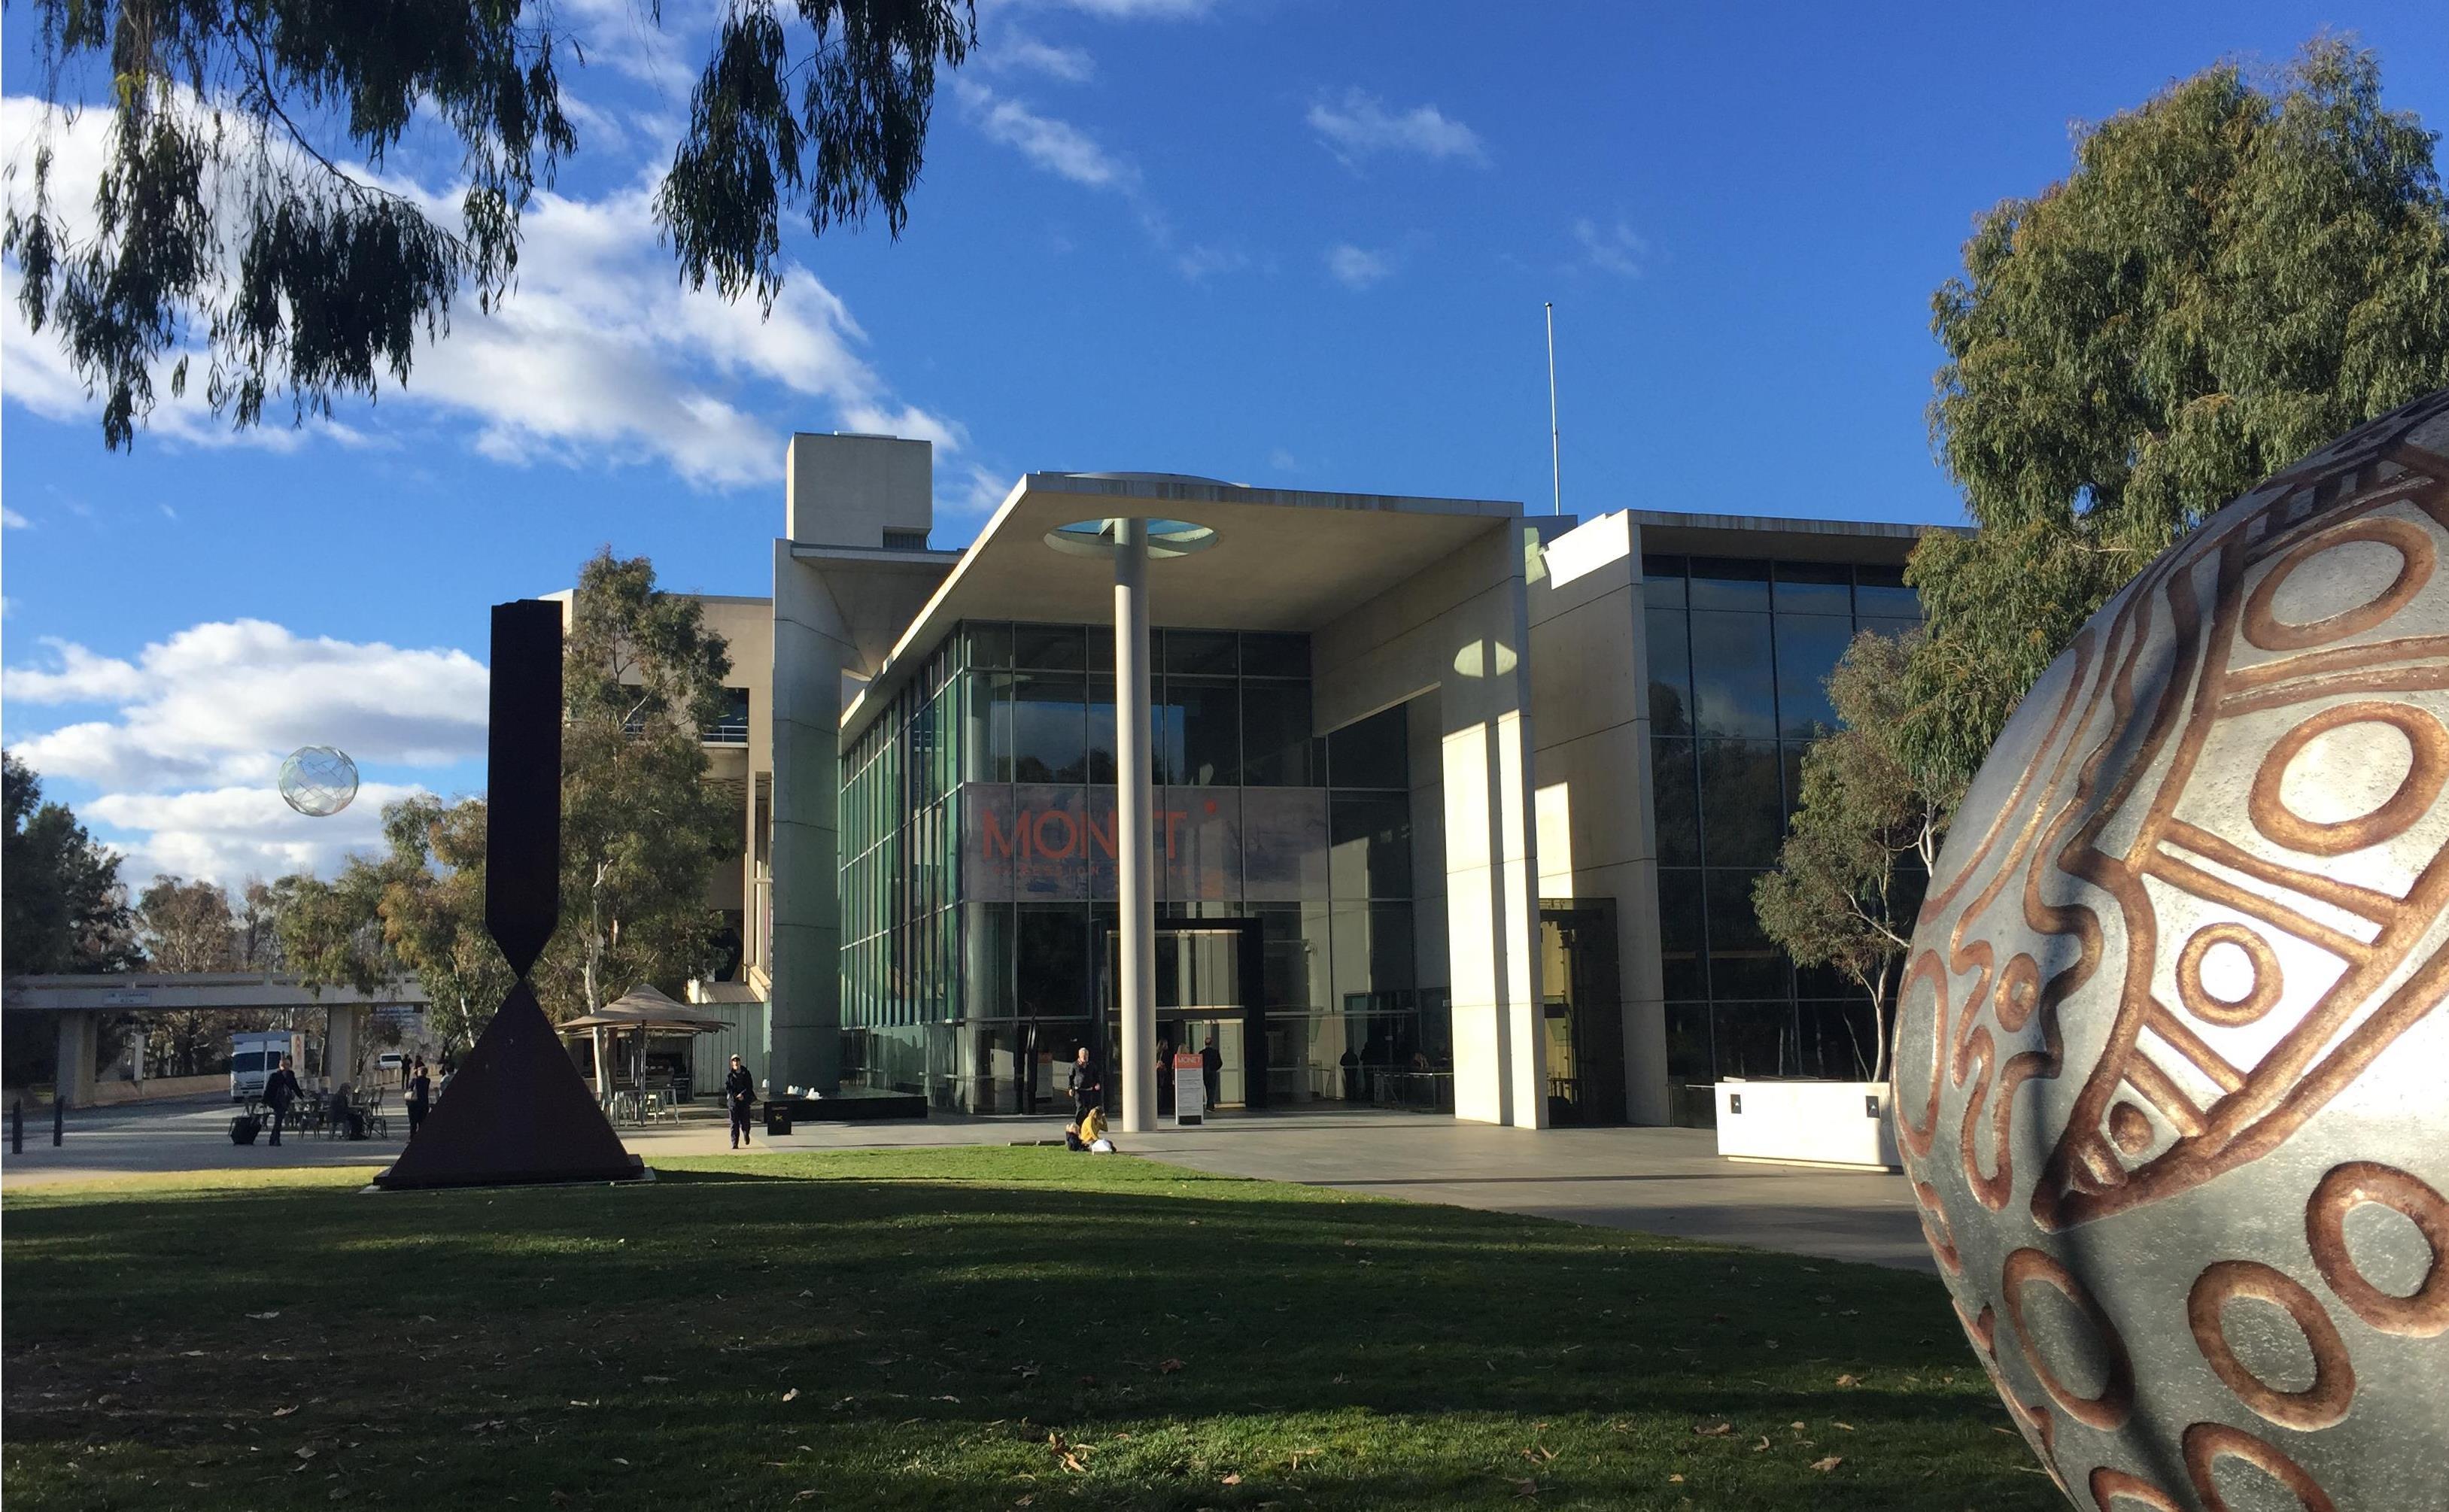 National Gallery of Australia, Canberra - The gift shop for